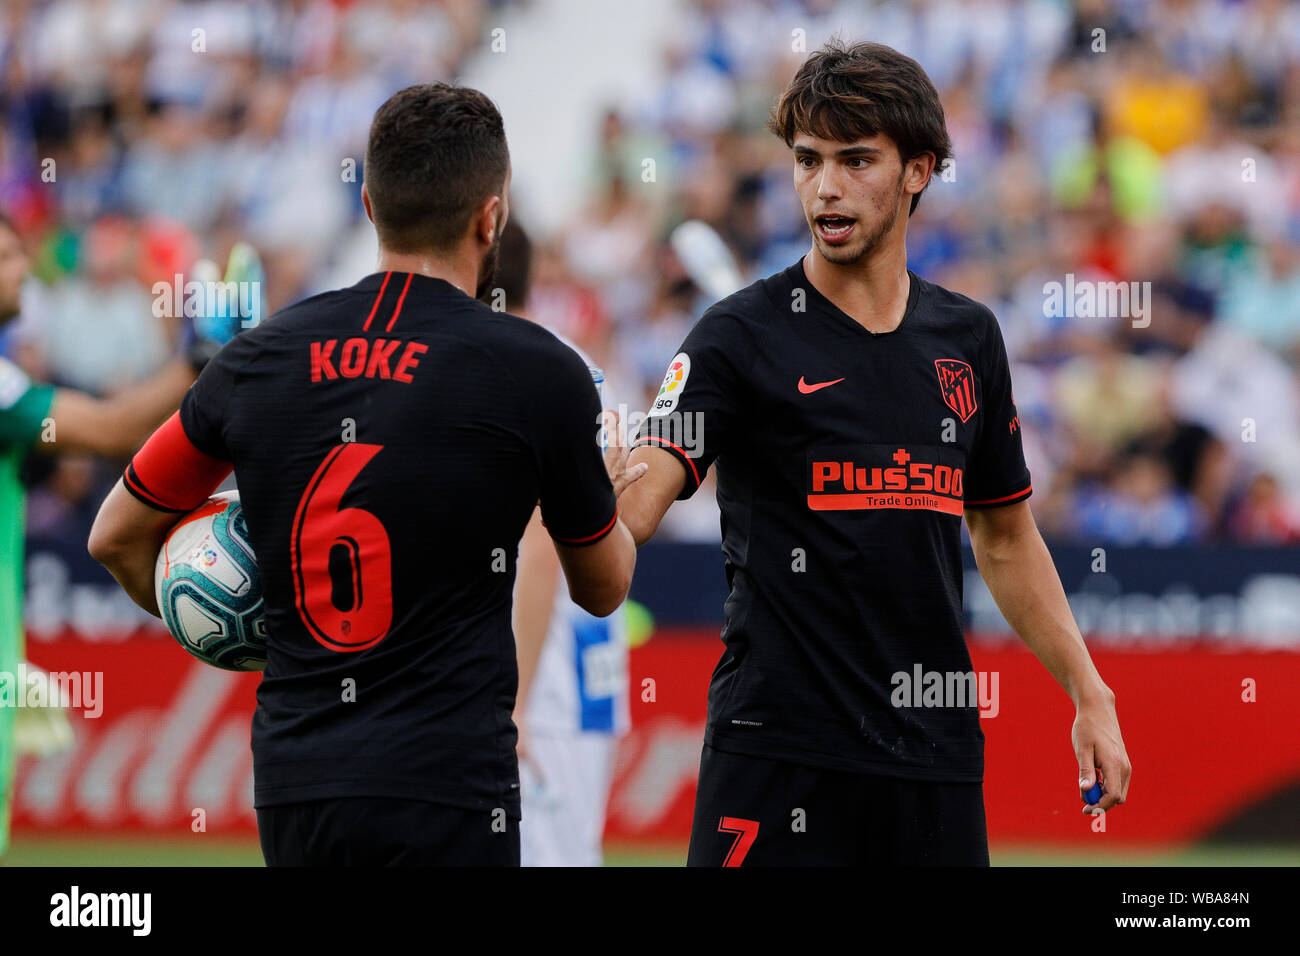 Madrid, Spain. 25th Aug, 2019. Atletico de Madrid's Jorge Resurreccion 'Koke' (L) and Joao Felix (R) are seen in action during the La Liga football match between CD Leganes and Atletico de Madrid at Butarque Stadium in Madrid.(Final score; CD Leganes 0:1 Atletico de Madrid) Credit: SOPA Images Limited/Alamy Live News Stock Photo